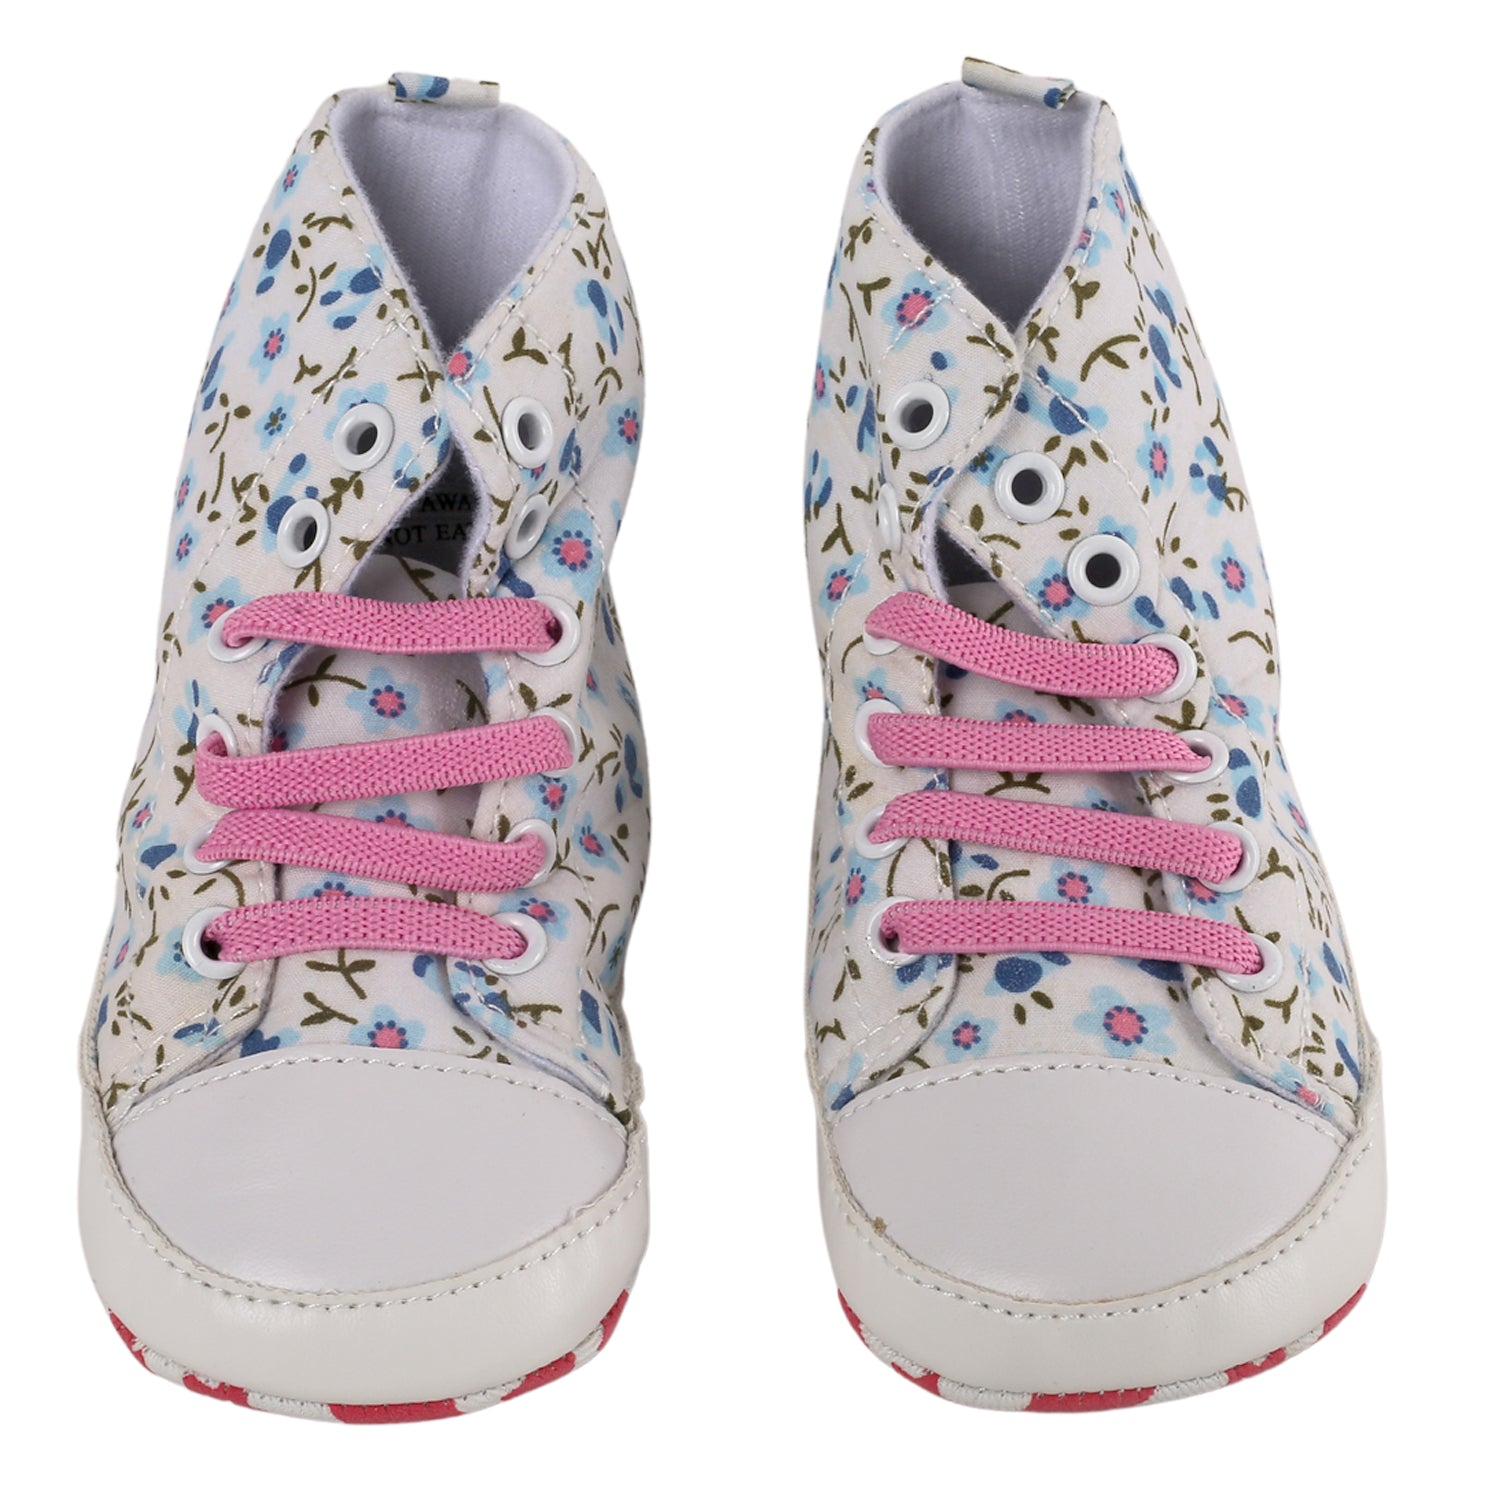 Baby Moo Floral White And Pink High Top Booties - Baby Moo